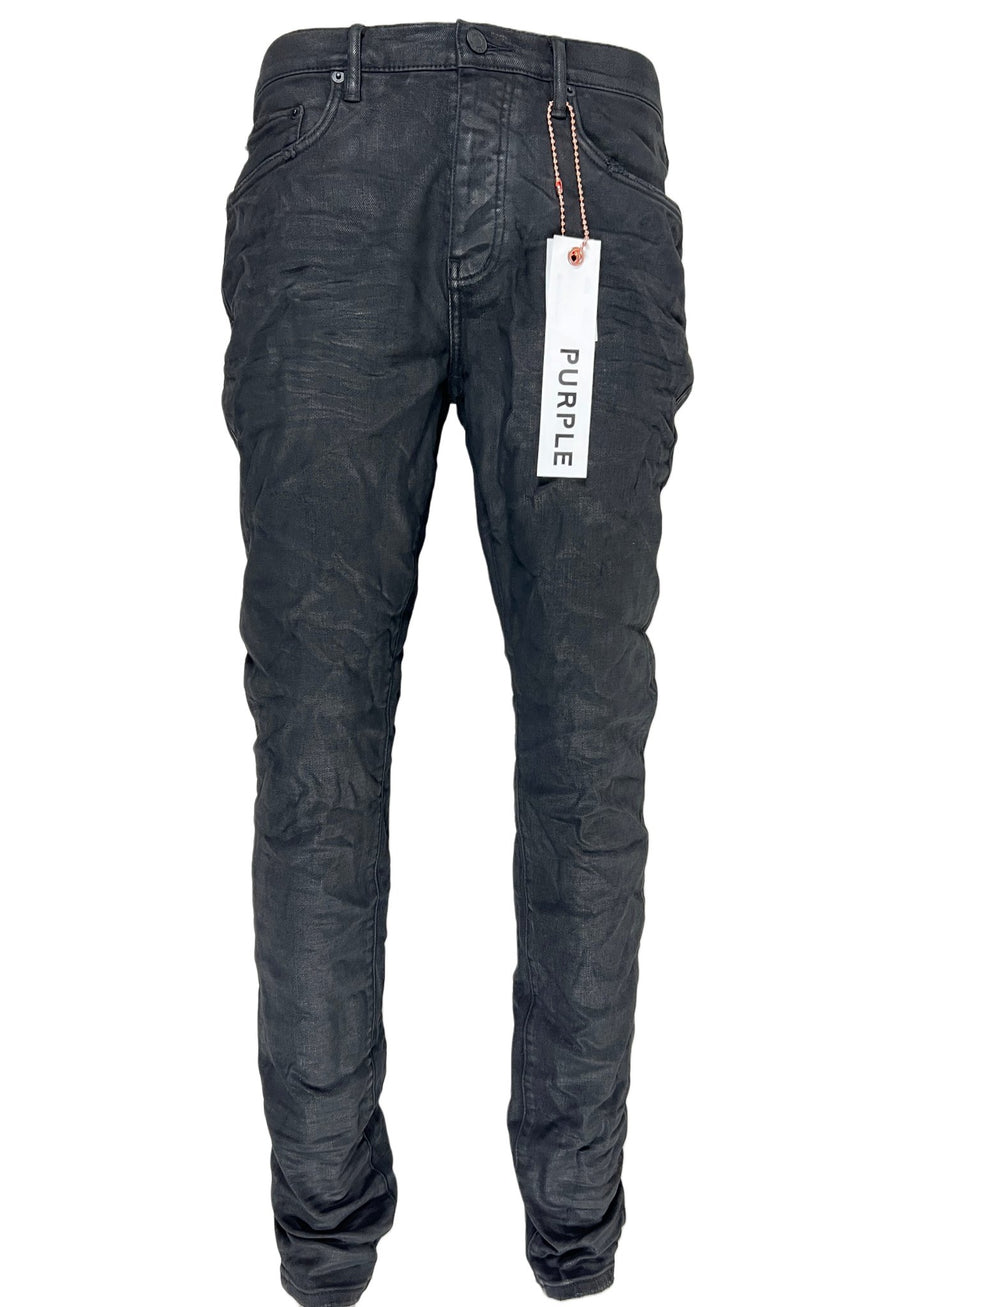 A pair of PURPLE BRAND black denim jeans with a tag on them.